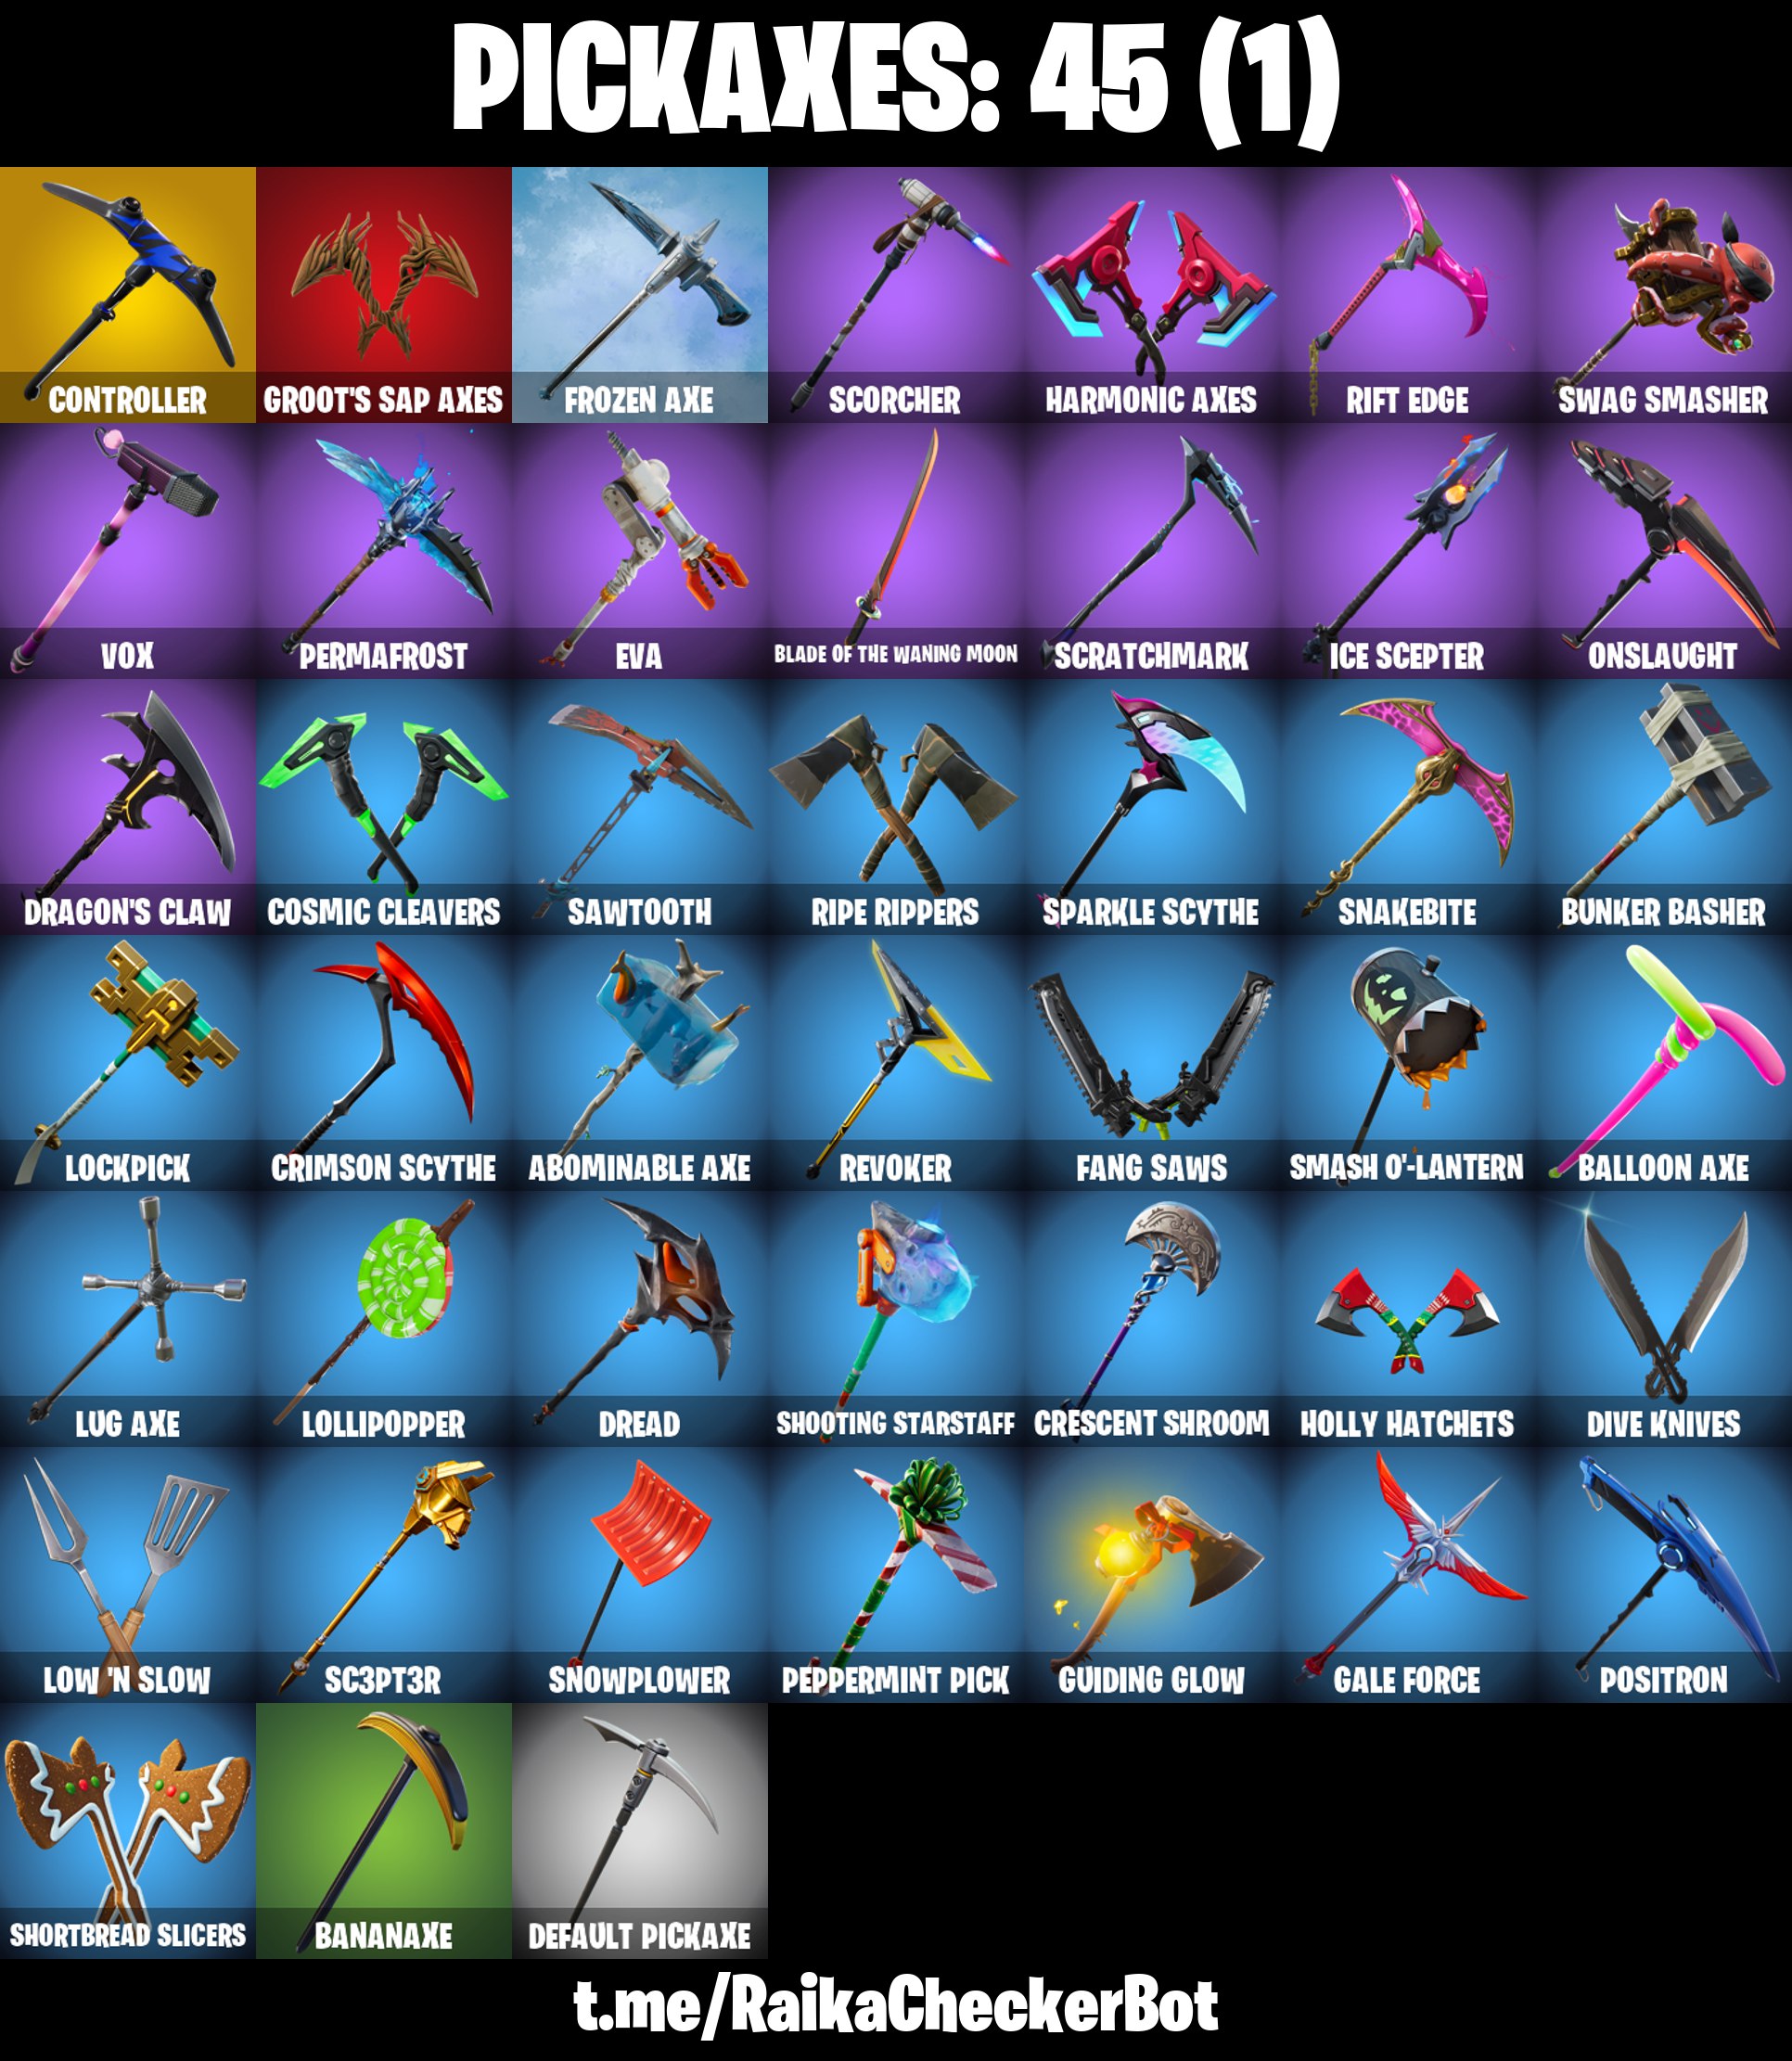 FA | 63 OUTFITS | BLUE TEAM LEADER | PRODIGY | BLUE STRIKER | TABULATOR | BLUE SHIFT | CONTROLLER | TAKE THE ELF | WIDOW’S PIROUETTE